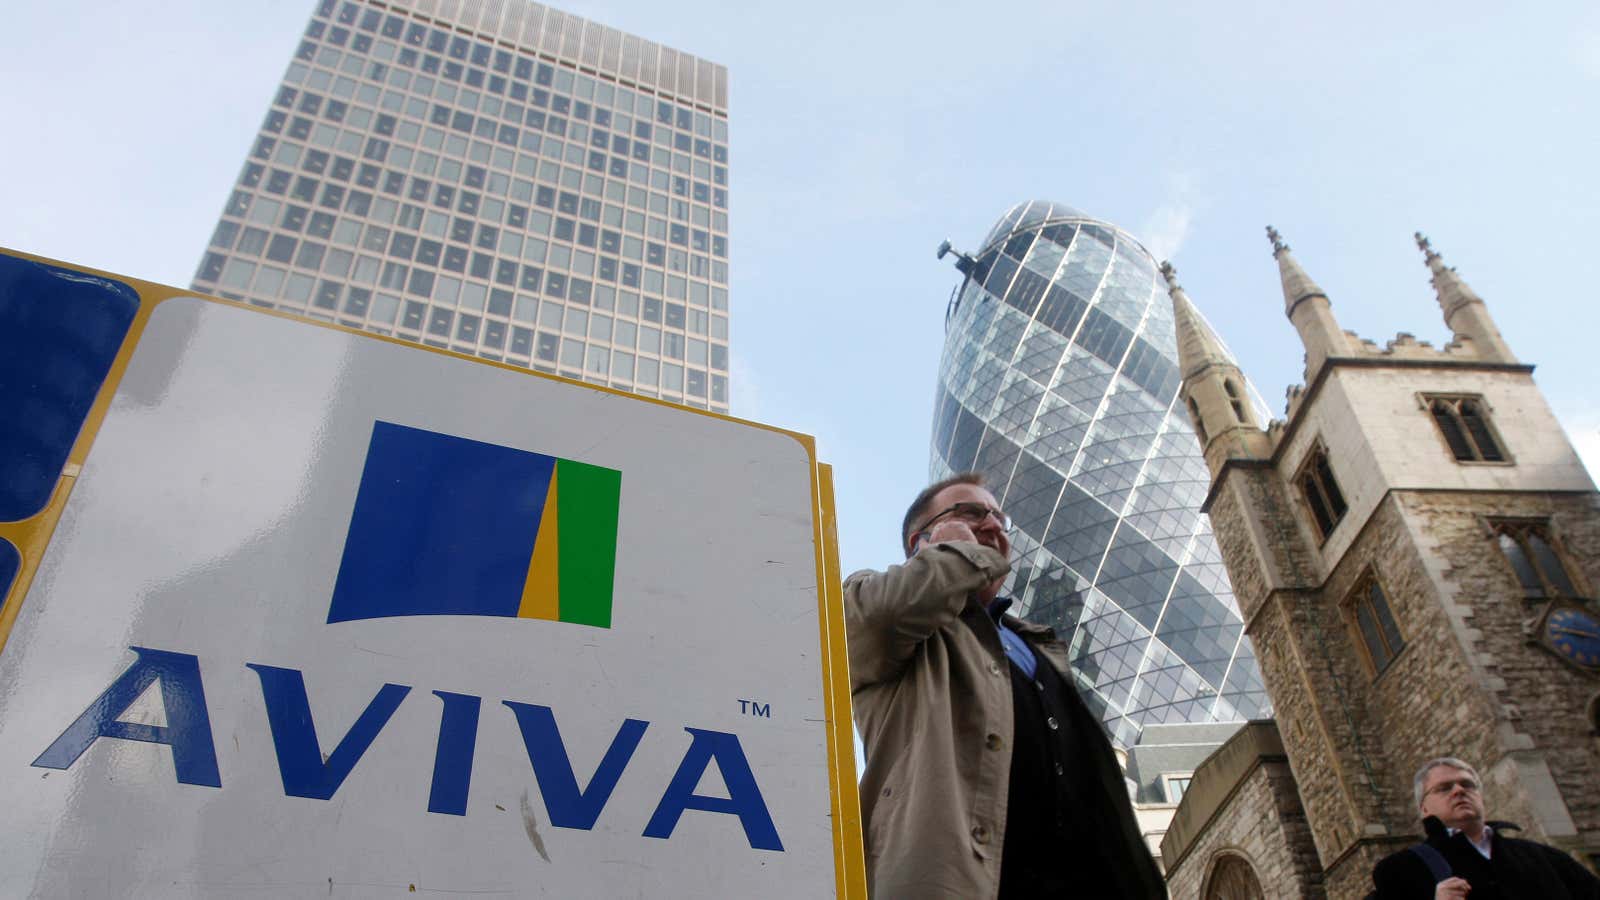 Aviva is unlikely to be the only company to offer such a deal.